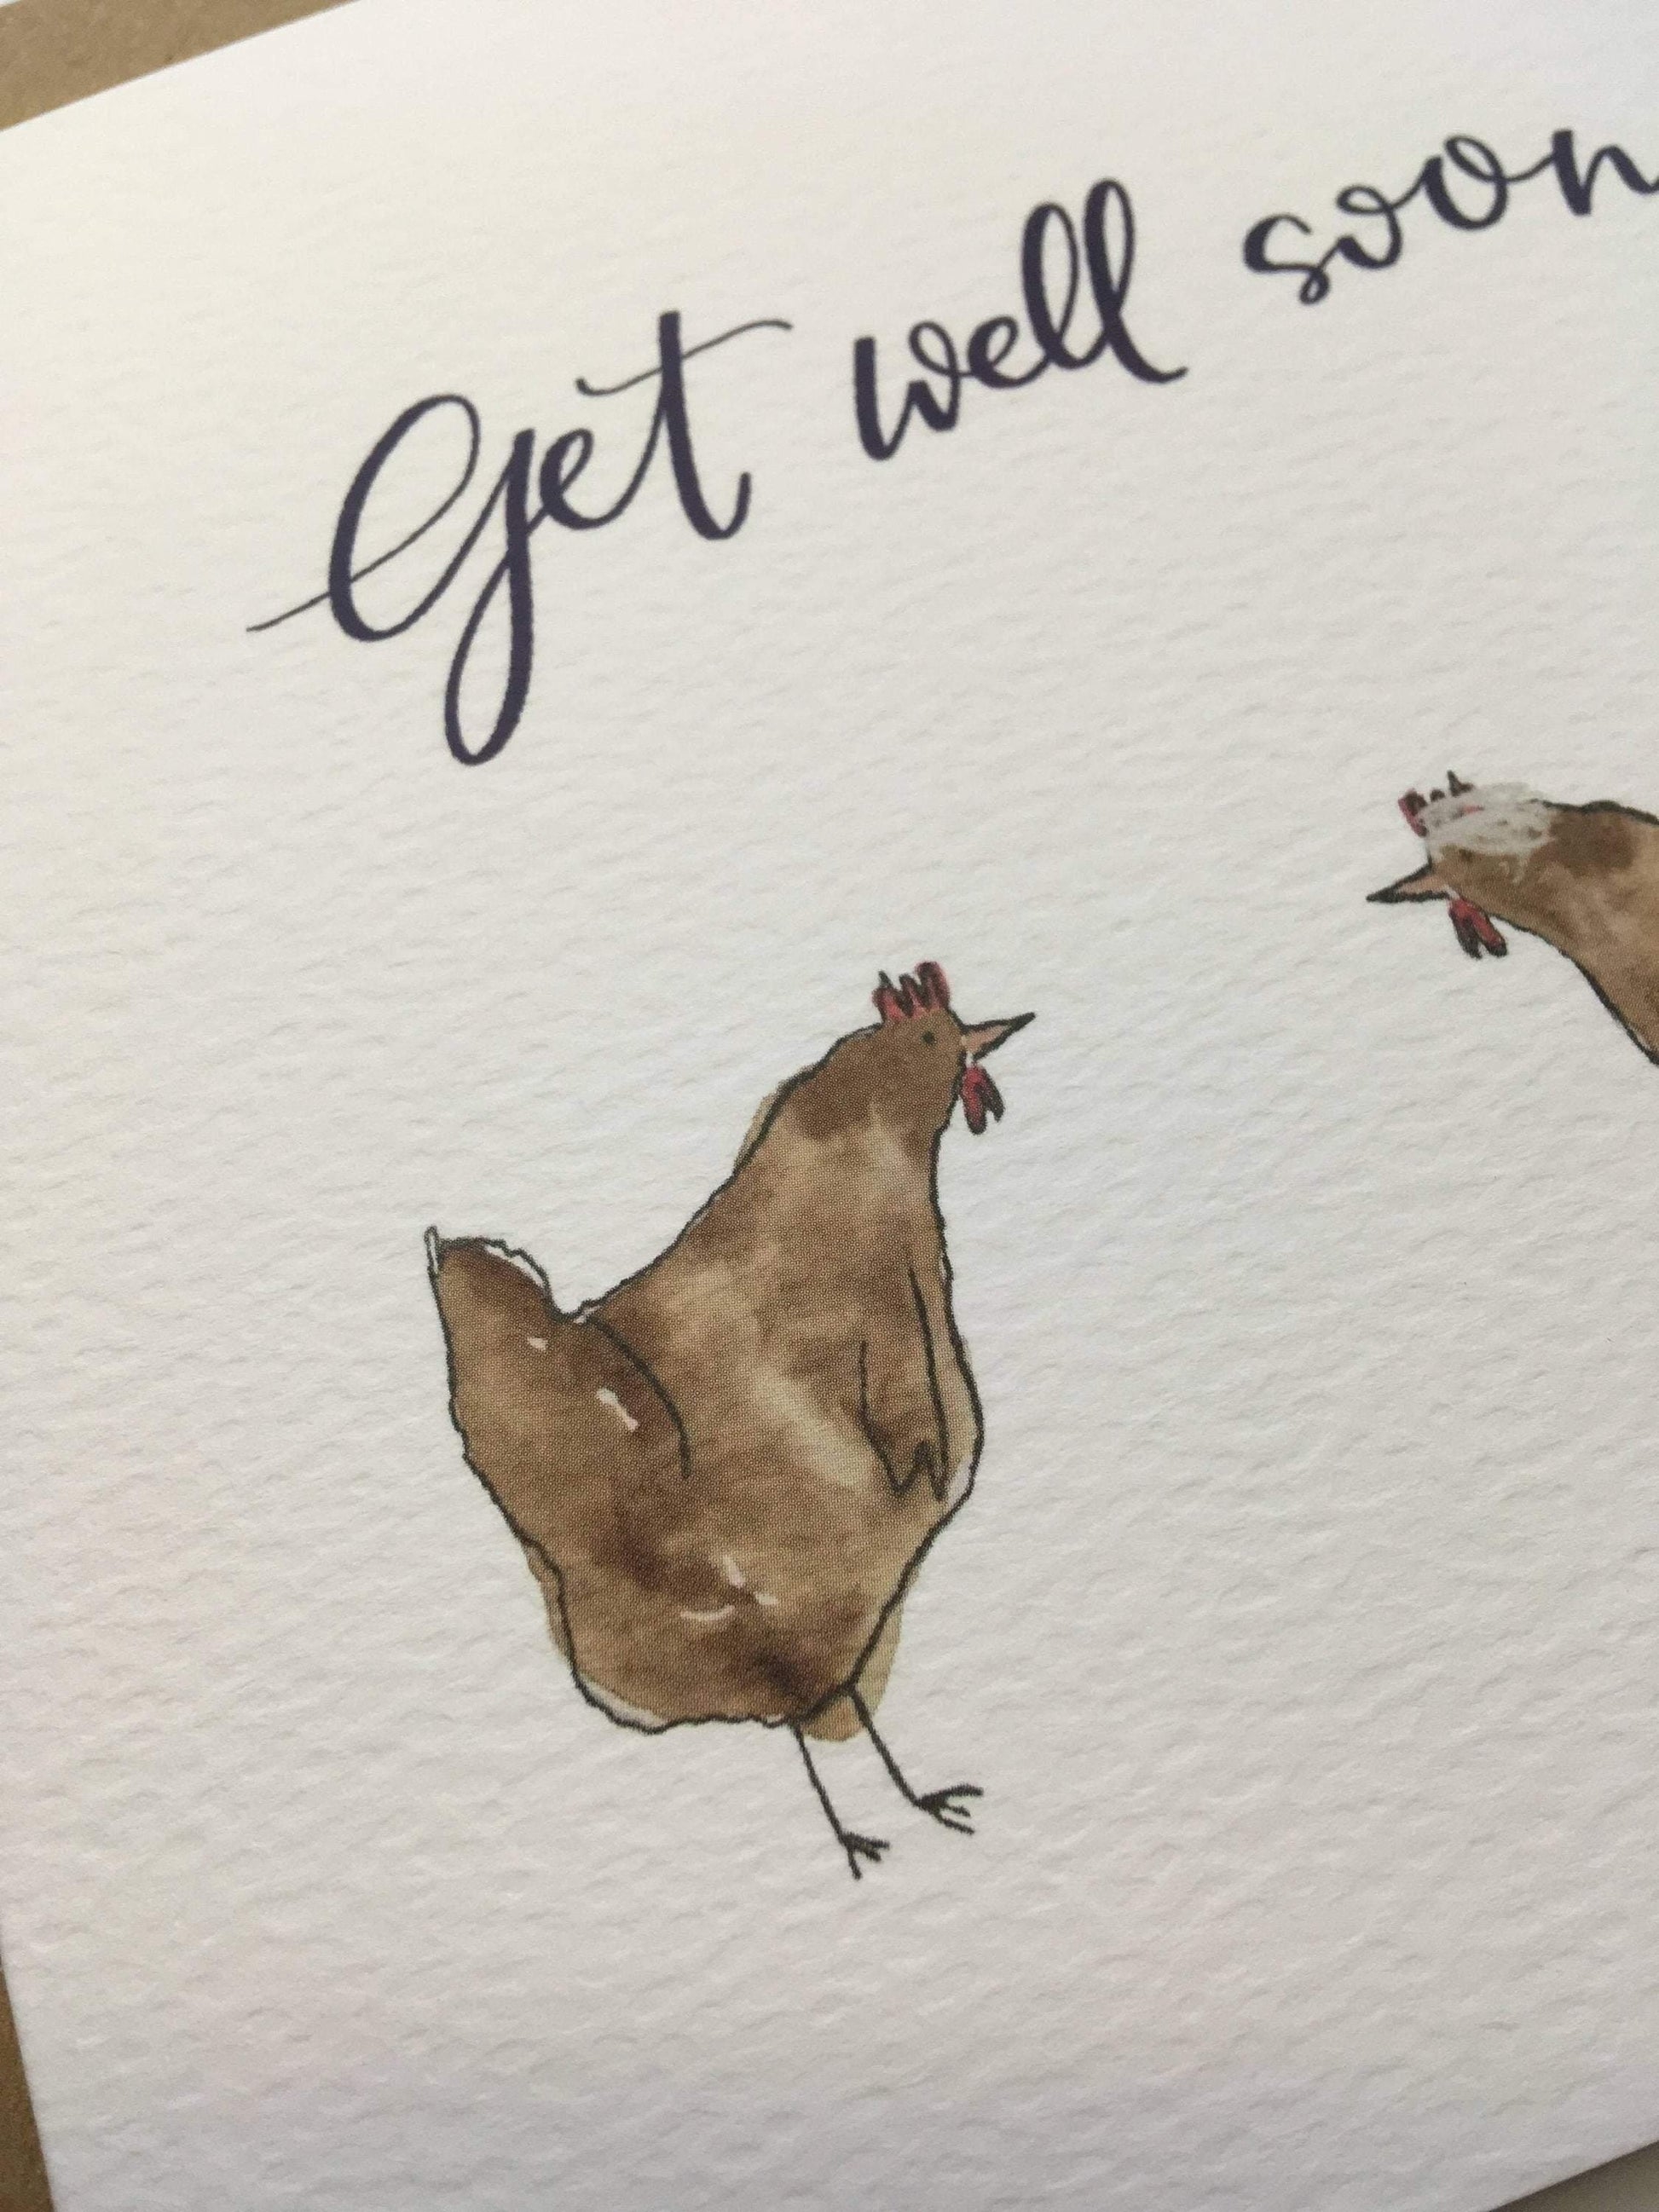 Hens get well soon card And Hope Designs Cards